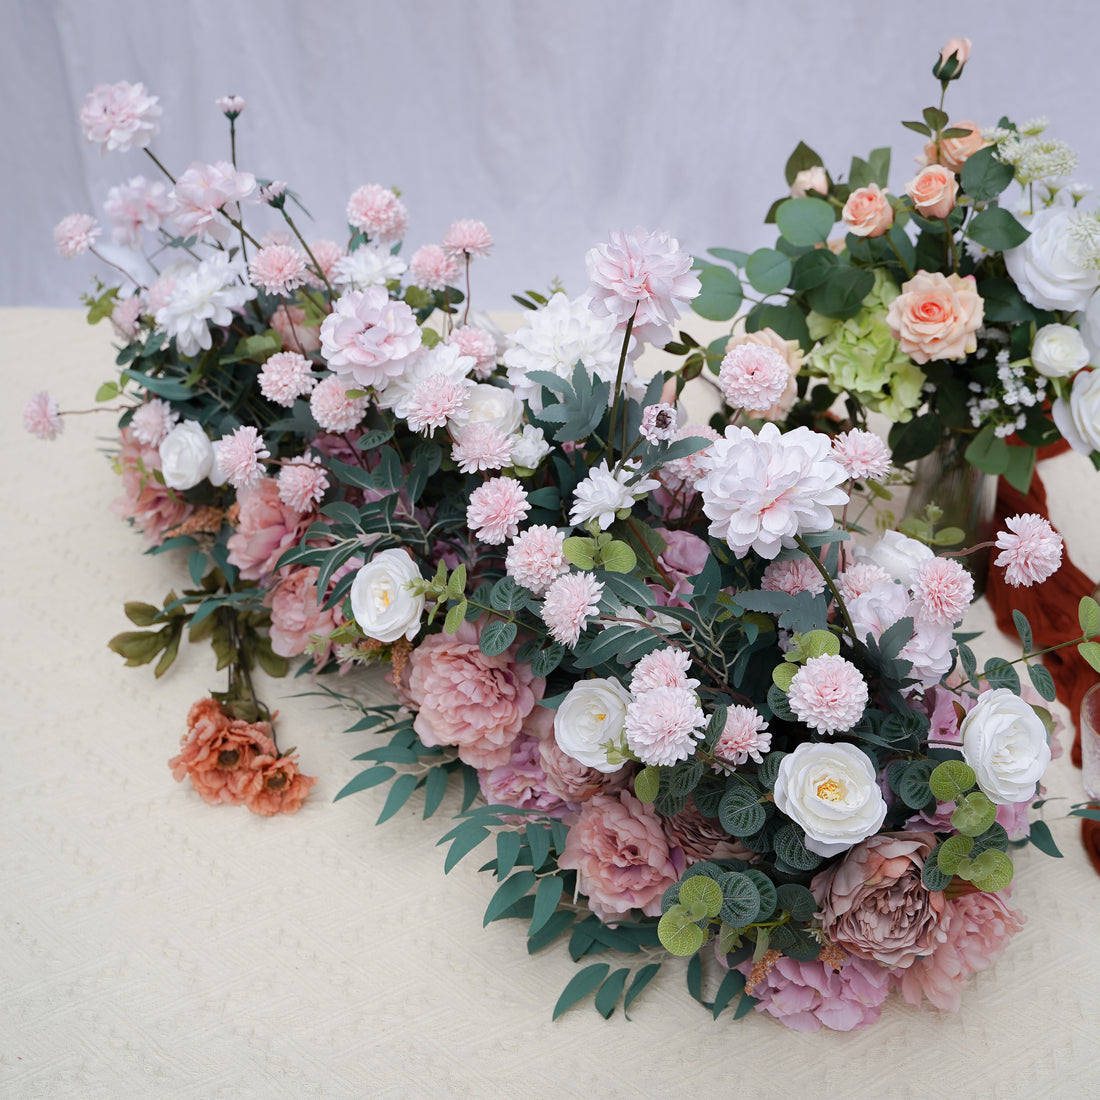 Fern:2023 New Flower Centerpiece Bouquet Table Decoration Flower Ball Road Lead Rose Morning